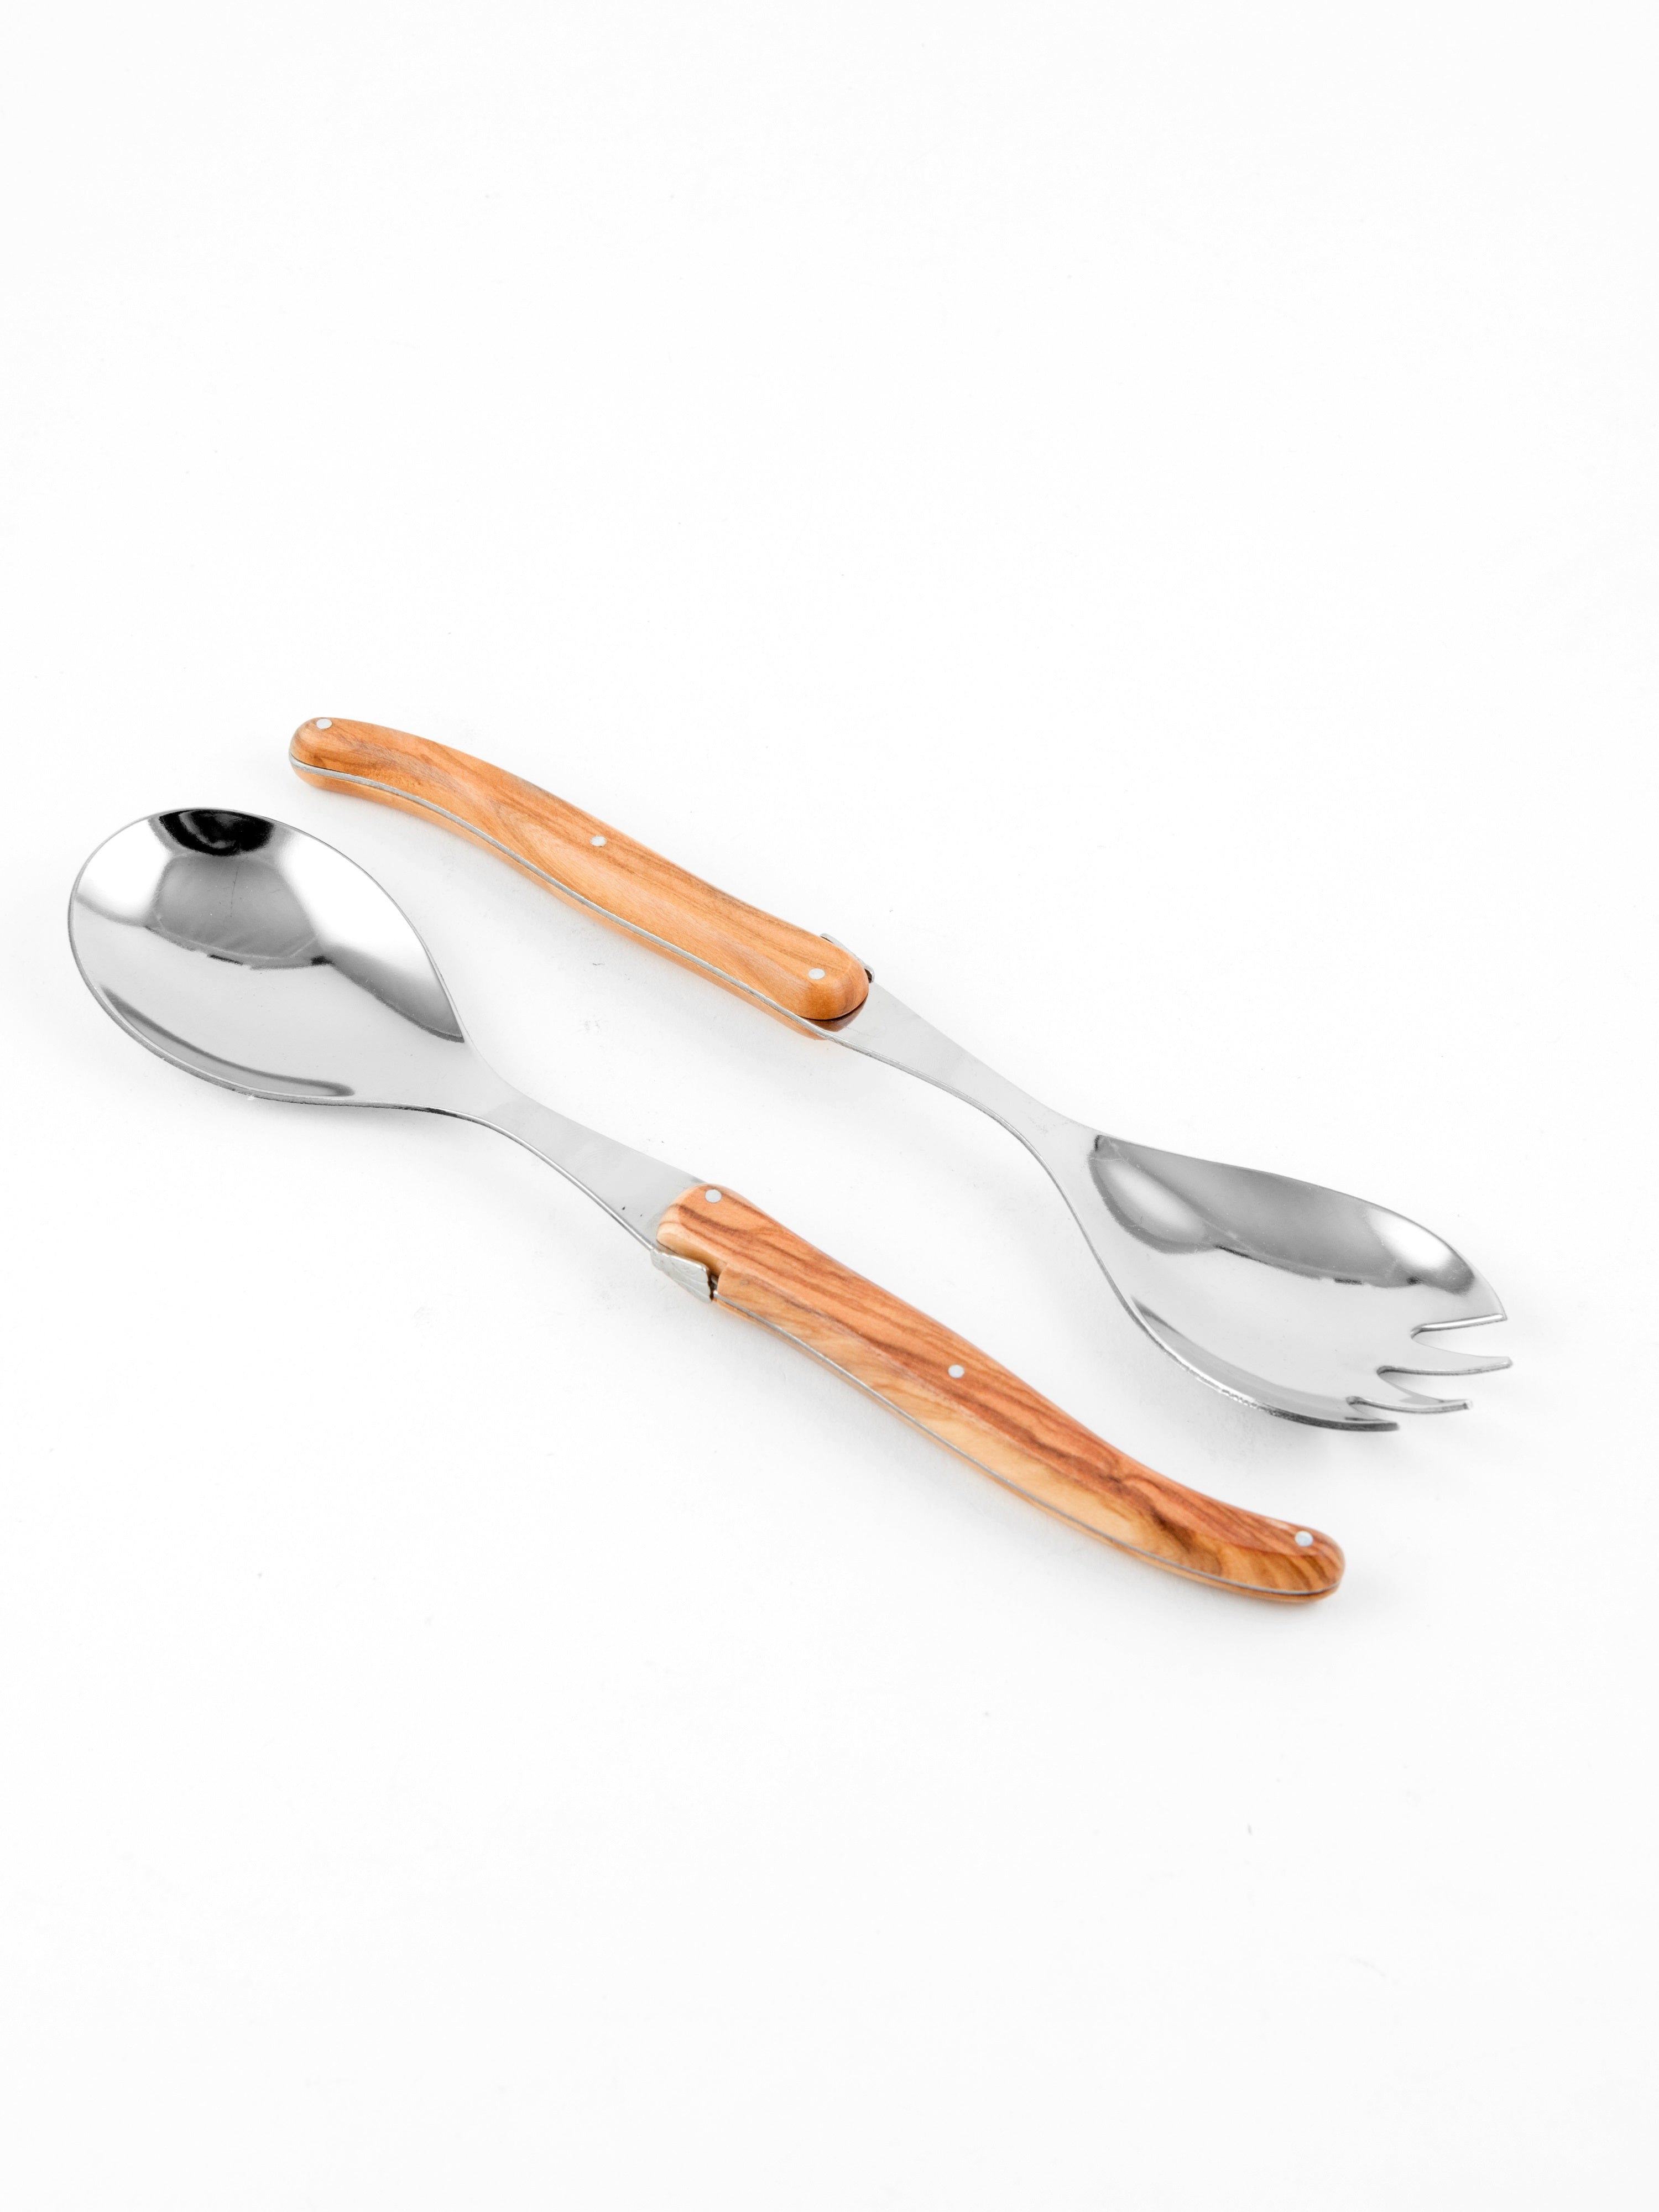 Laguiole French Olivewood Serving Set in Wood Box - Regular Finish Cutlery Laguiole Brand_Laguiole Carving Sets Kitchen_Dinnerware Laguiole Laguiole_machine_finished_Salad_set_Ol_2